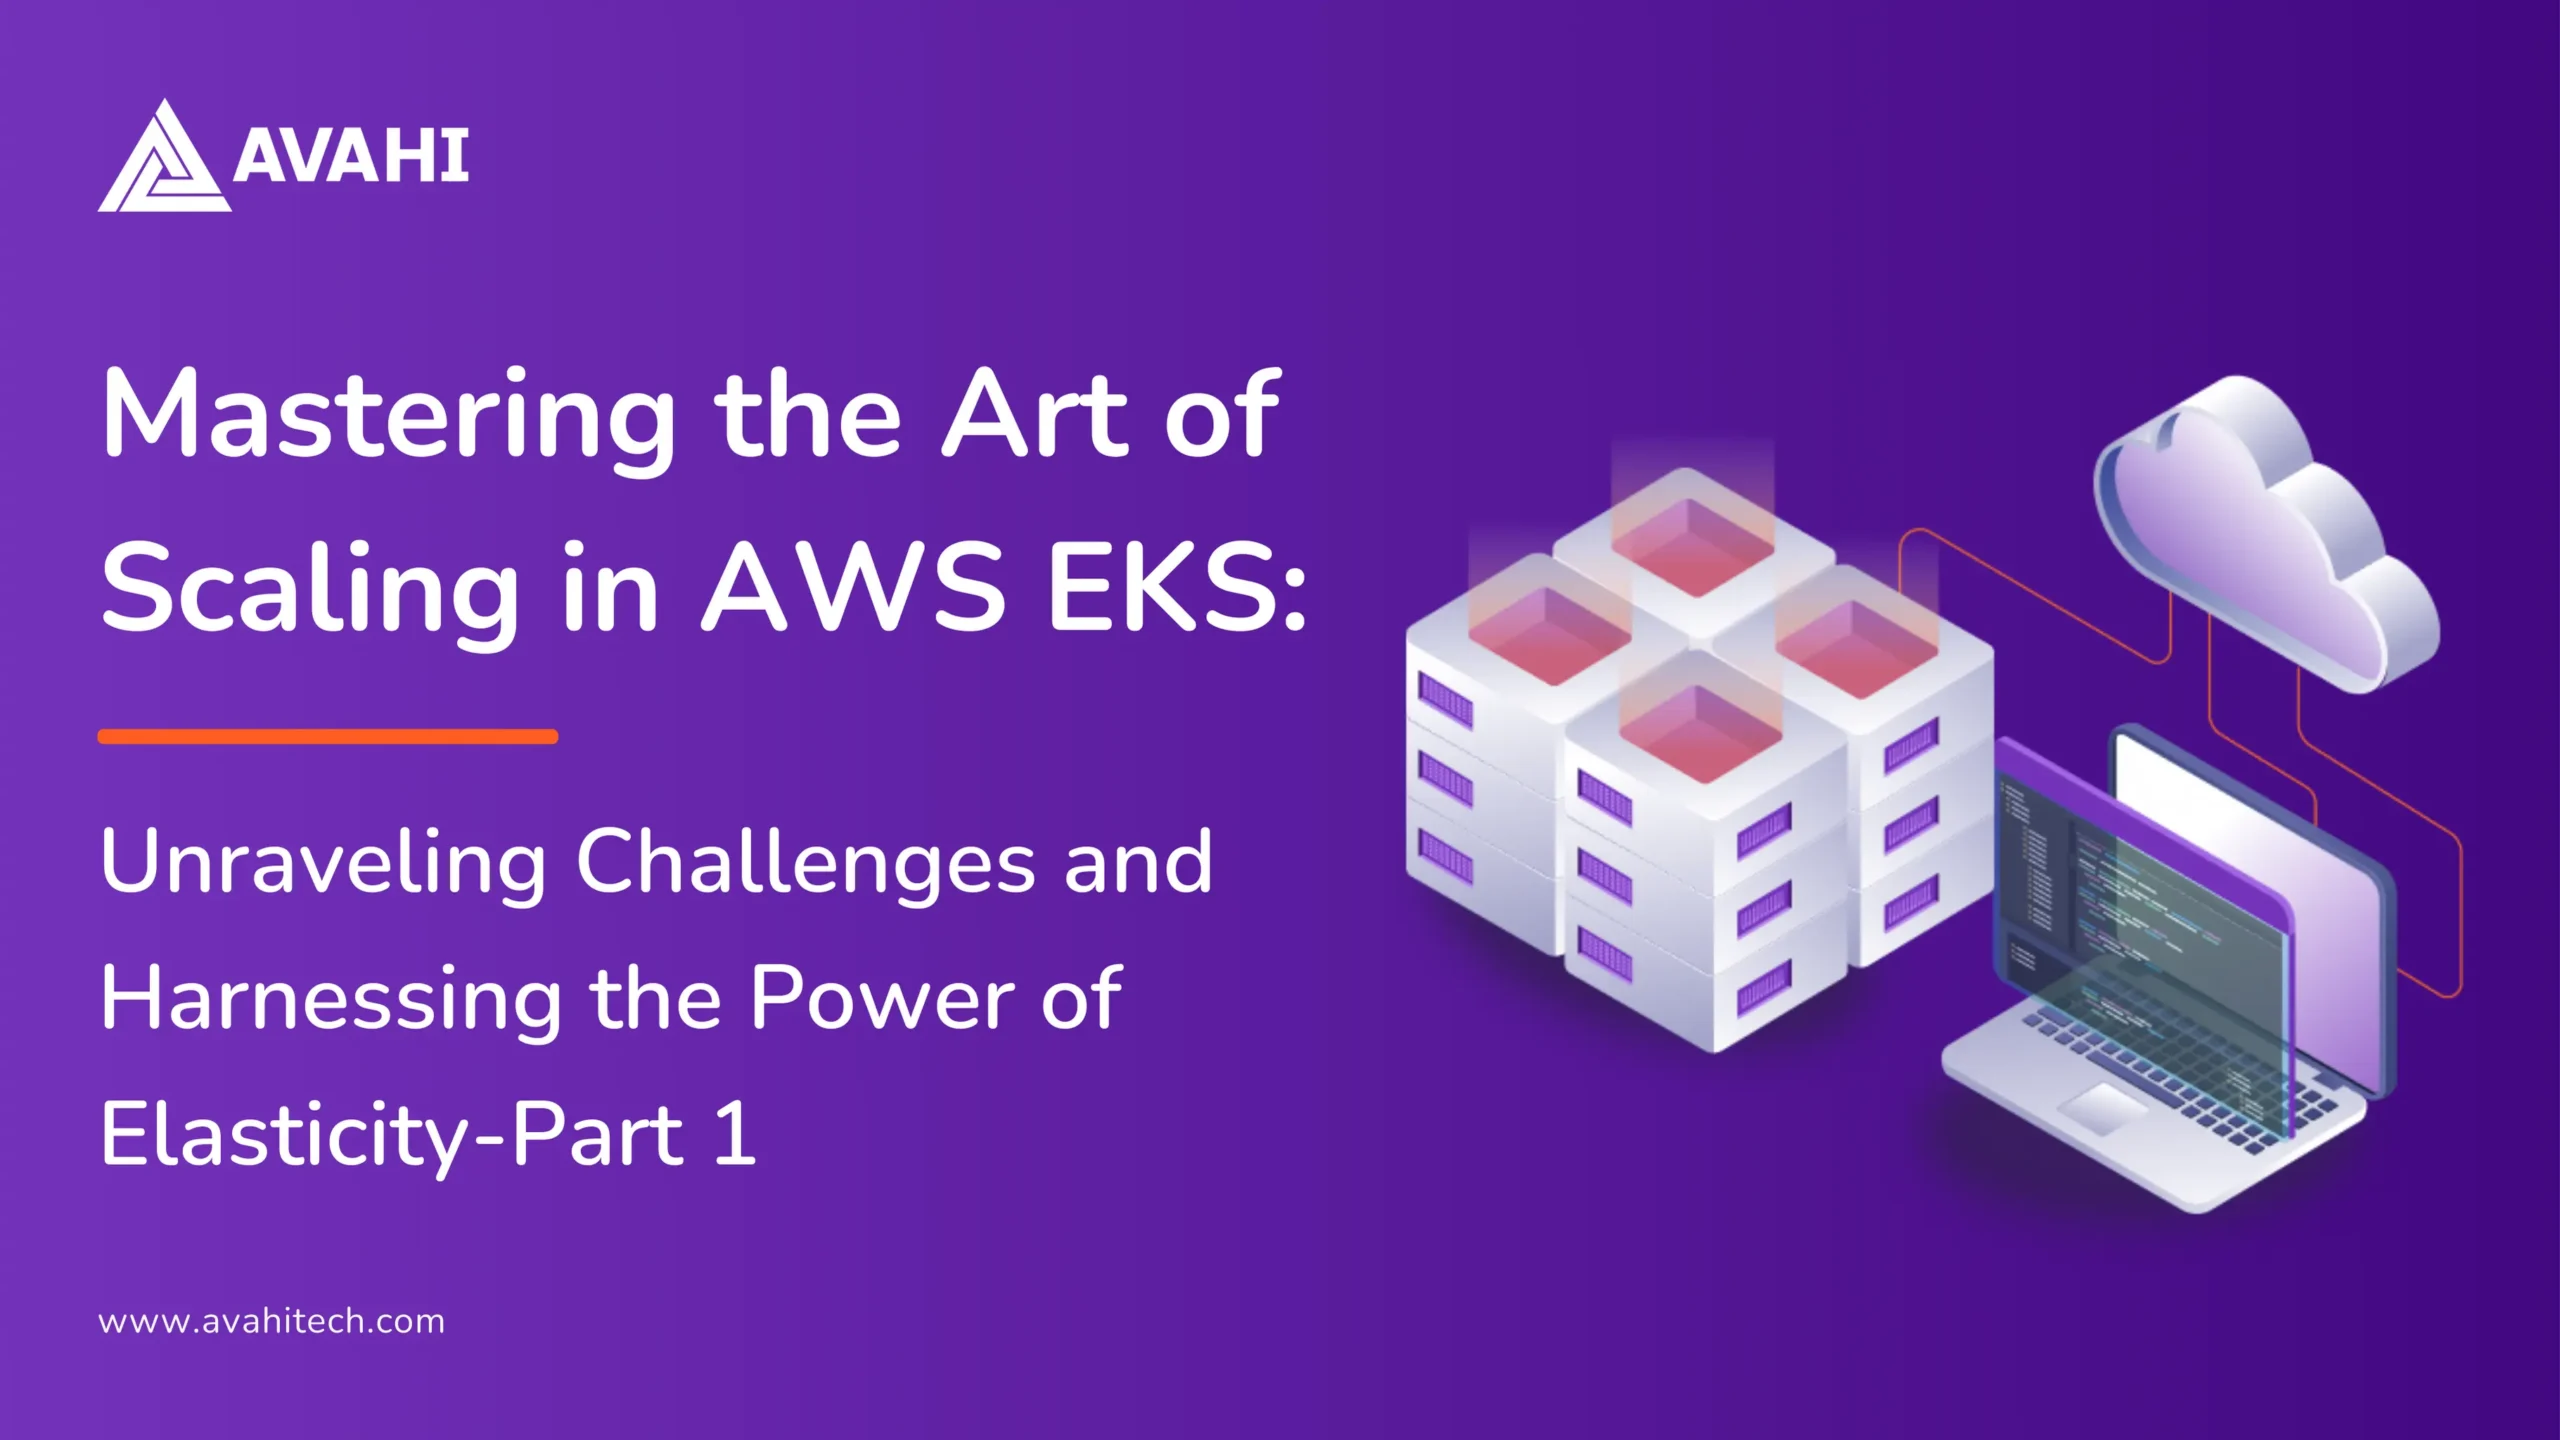 Mastering the Art of Scaling in AWS EKS Unraveling Challenges and Harnessing the Power of Elasticity-Part 1 (1)